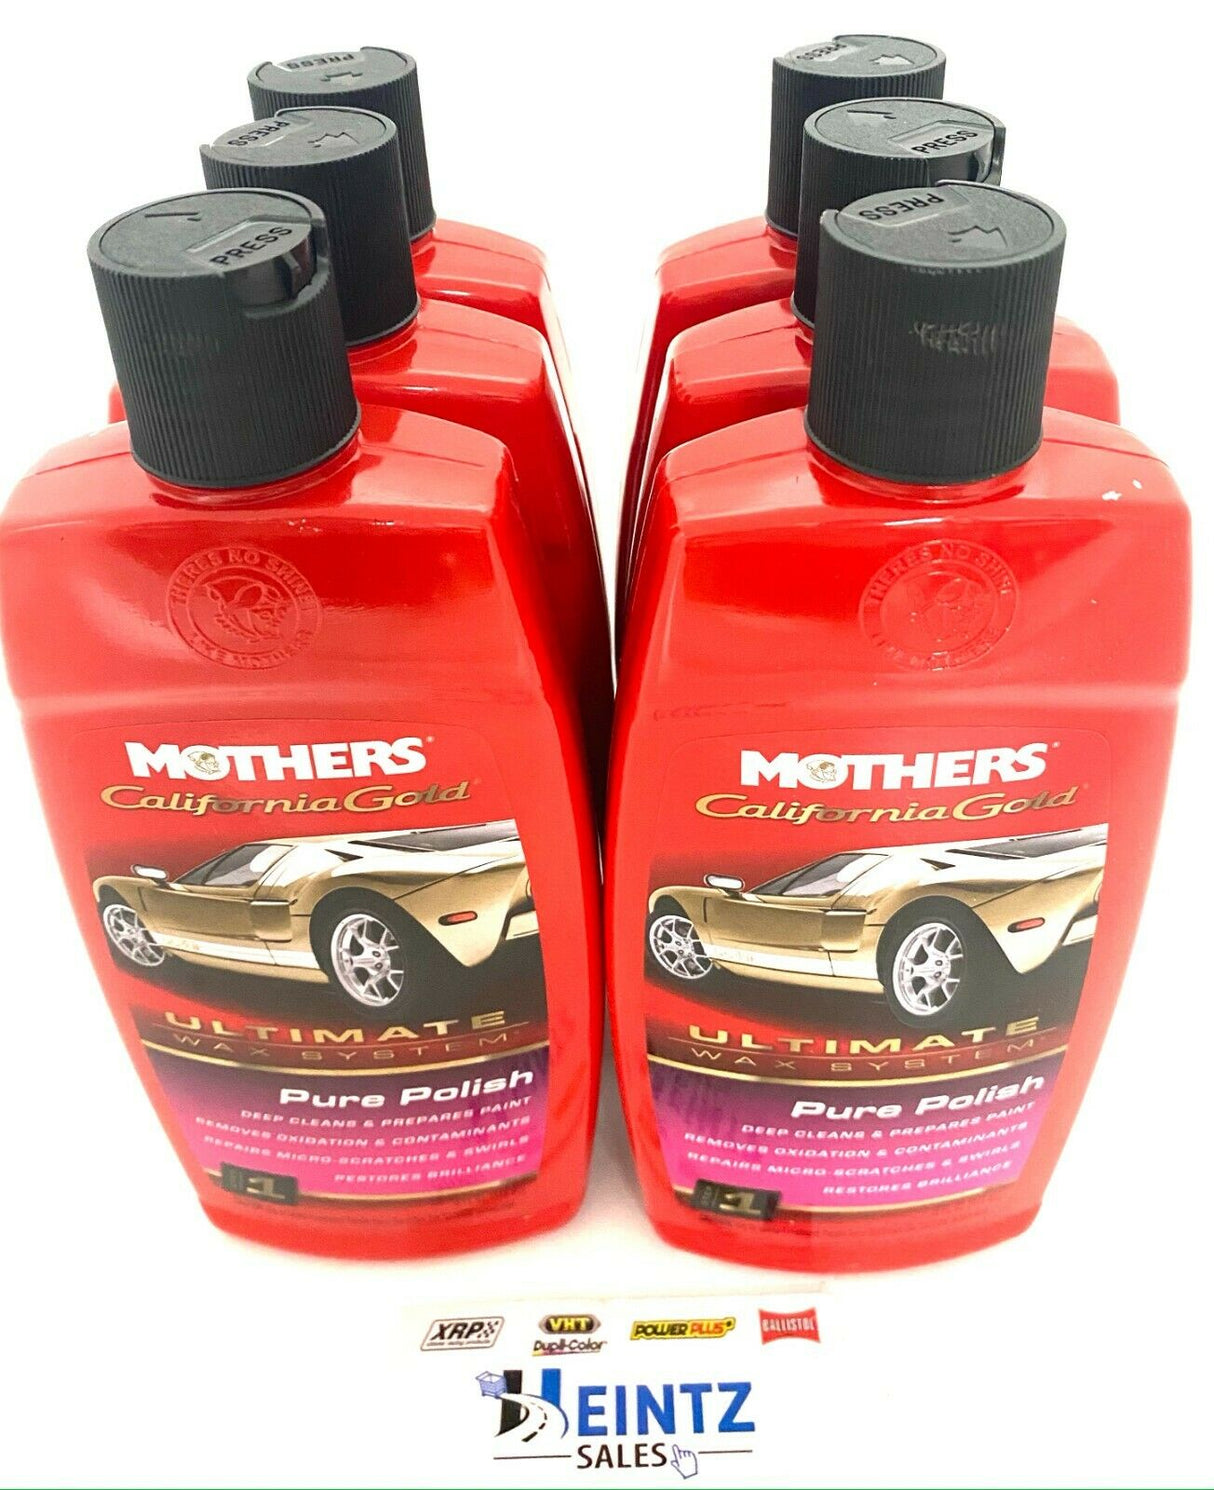 MOTHERS 07100 California Gold Pure Polish 6 PACK - Deep Cleans - Restore - 16 oz.